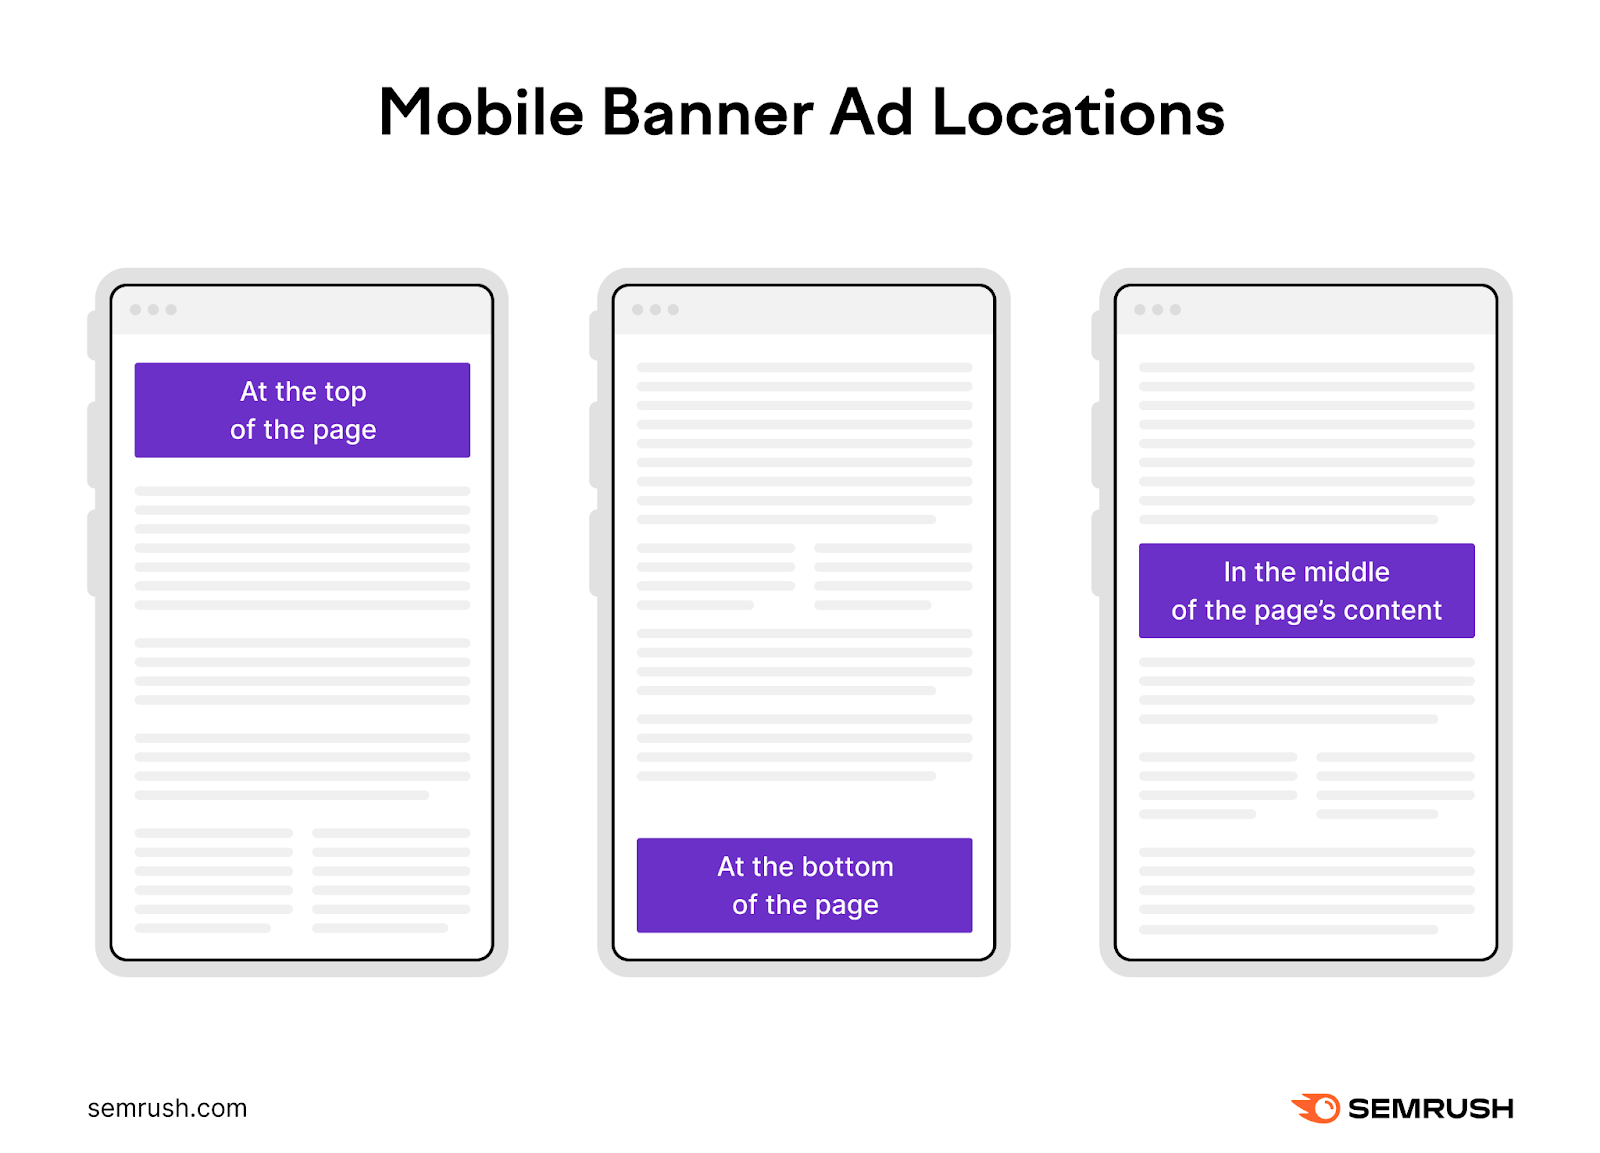 Mobile banner ad locations